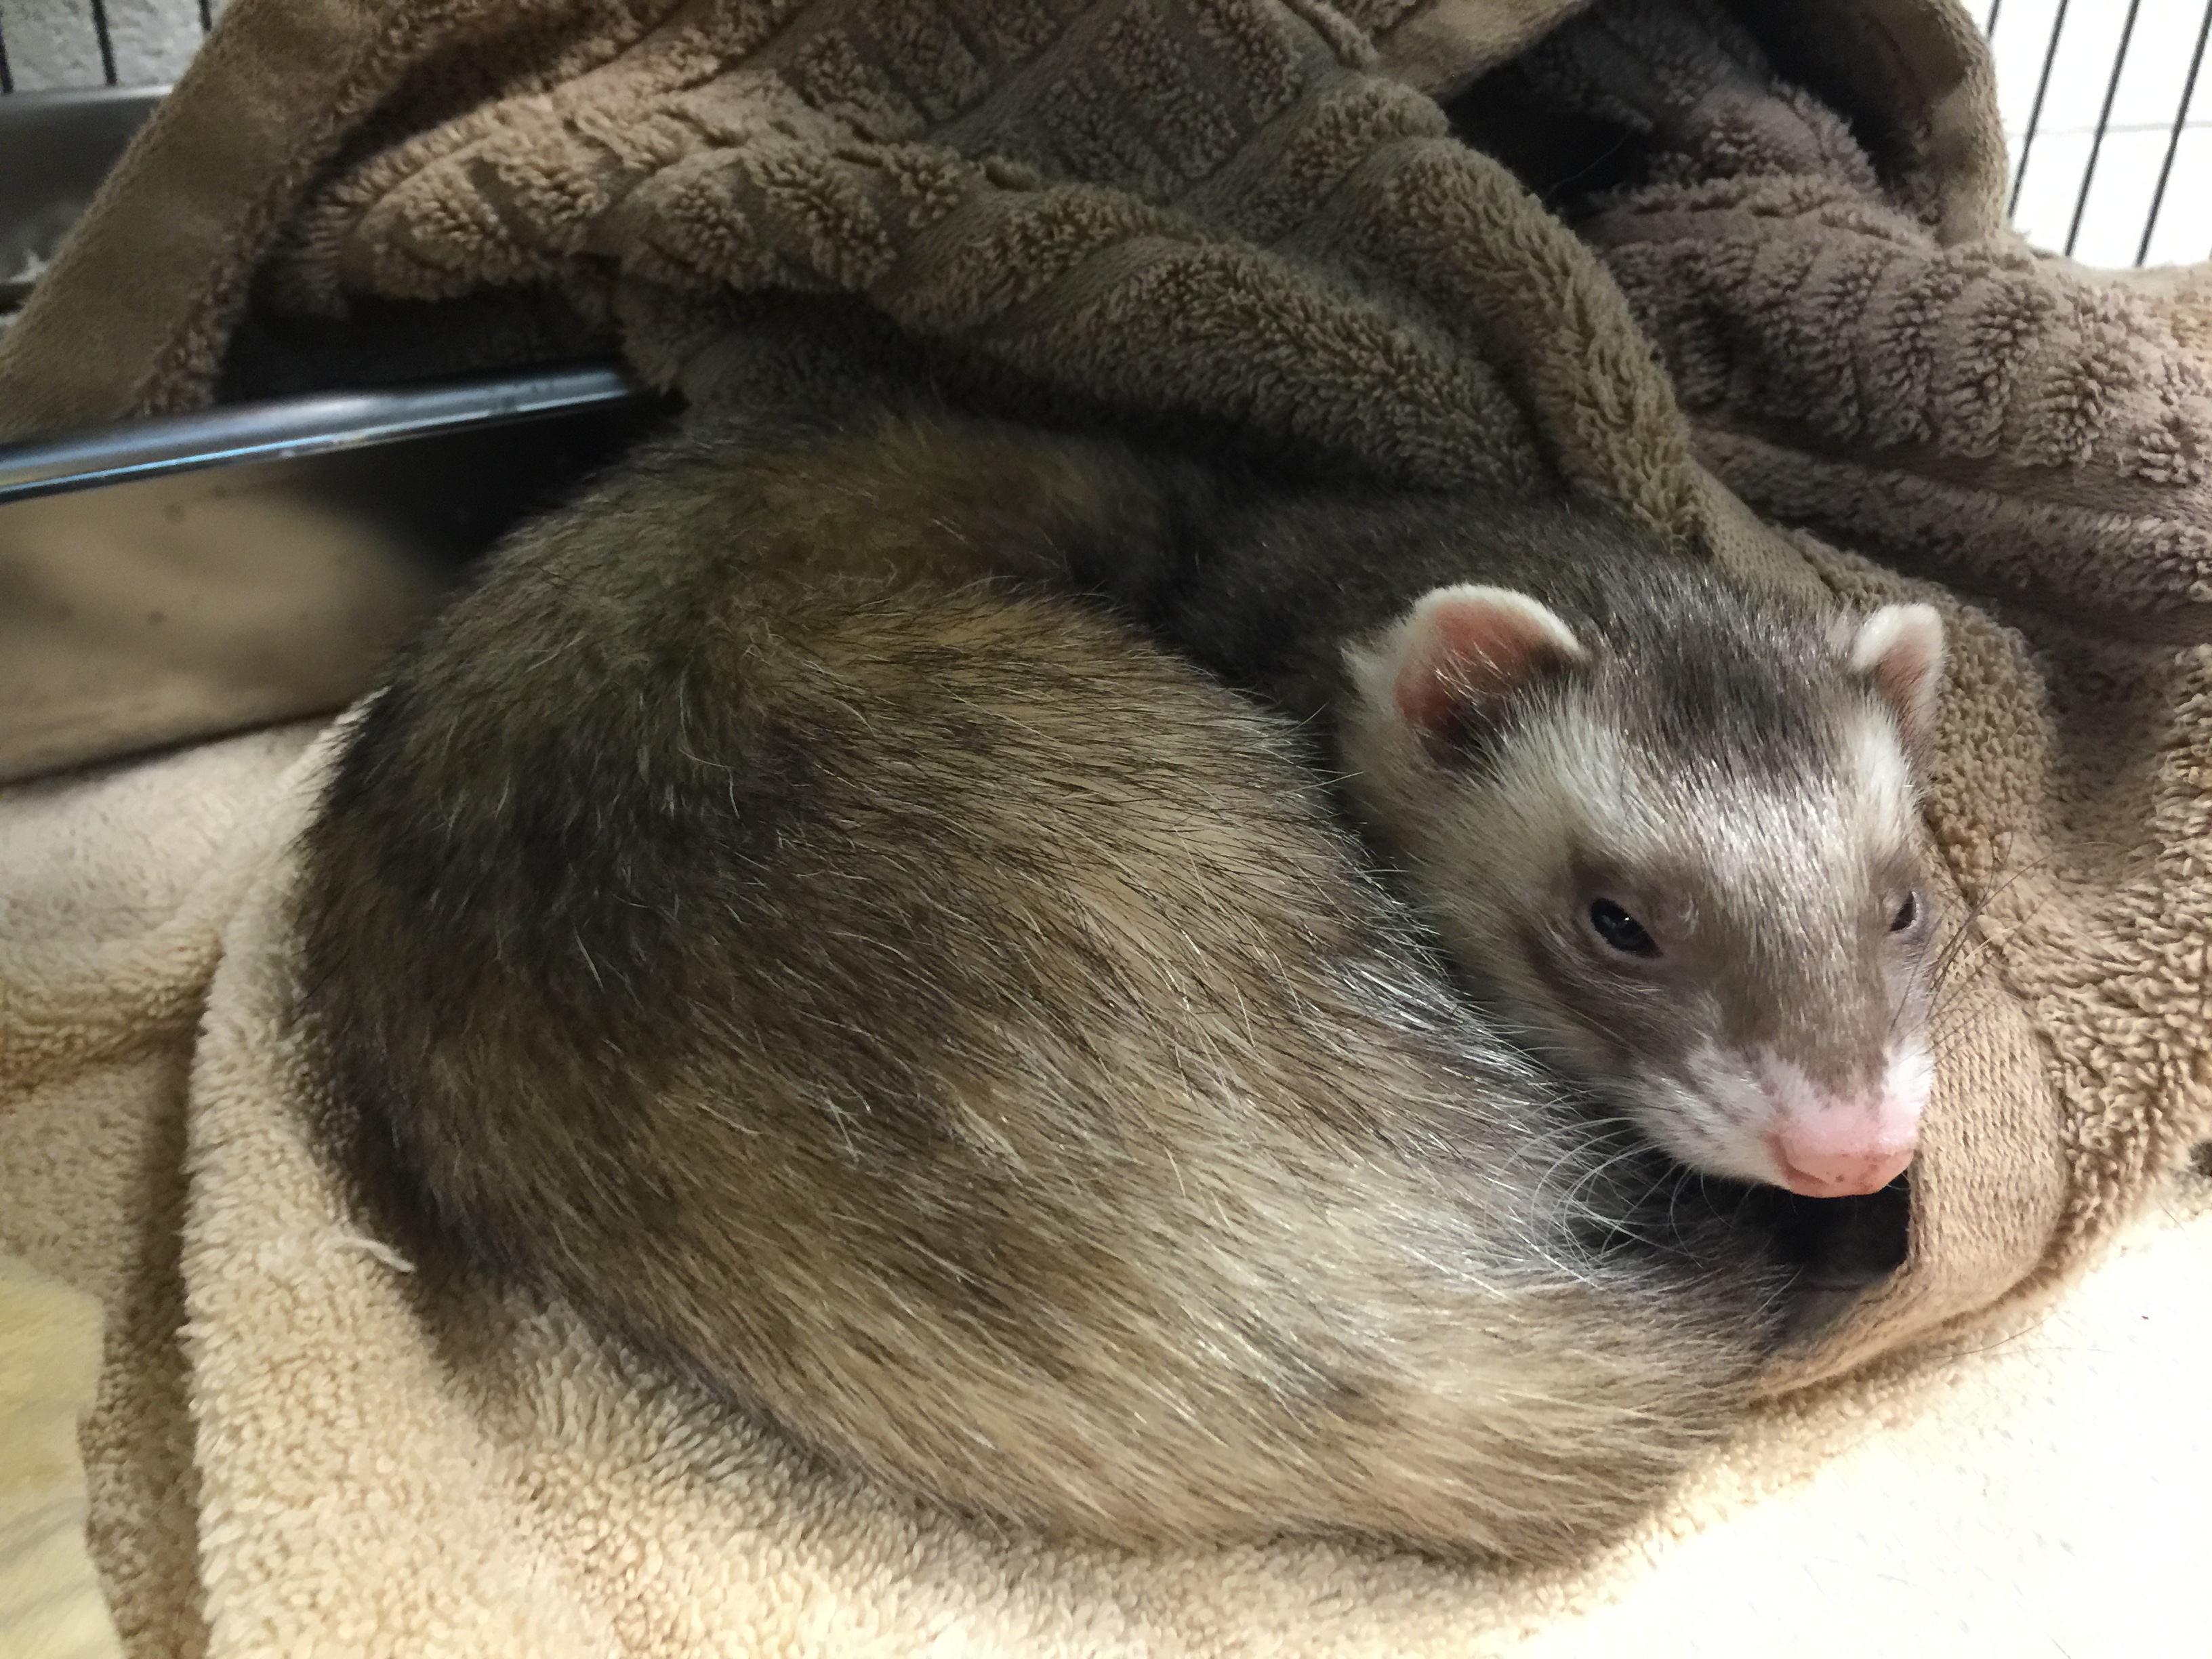 Maryland woman charged with cruelty and neglect of ferrets